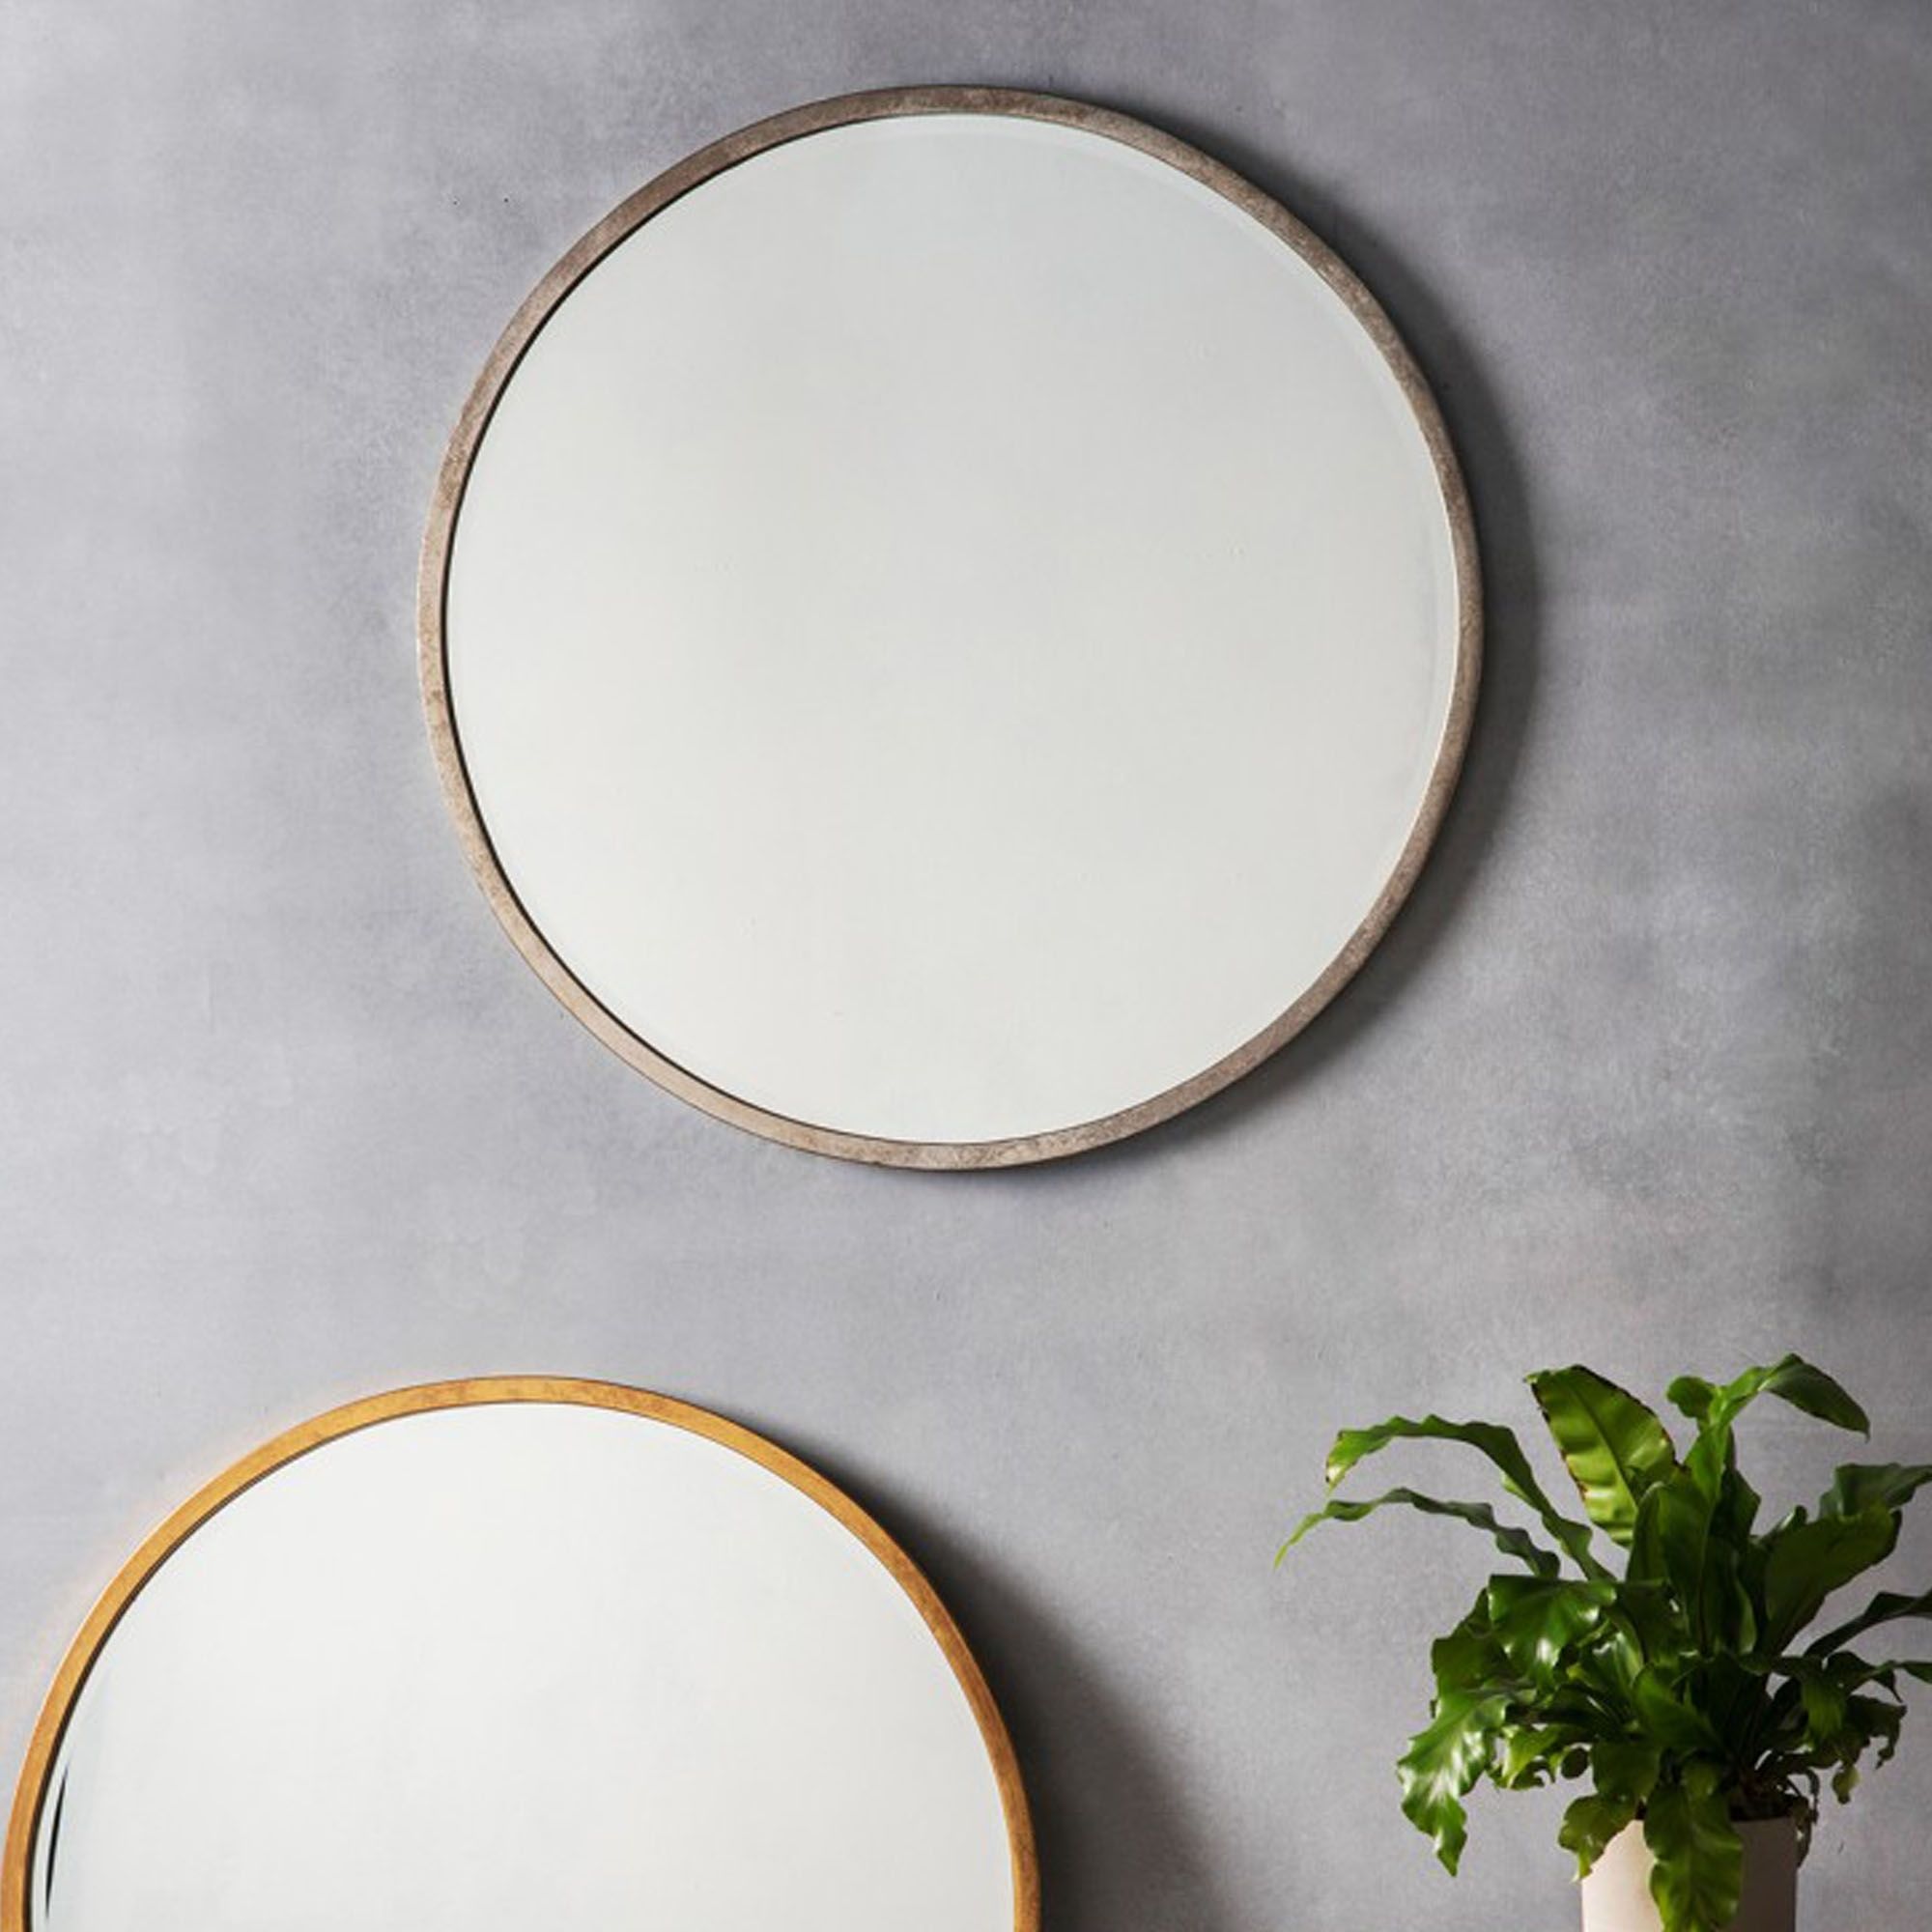 Higgins Antique Silver Round Wall Mirror |wall Mirrors| Homesdirect365 Intended For Scalloped Round Modern Oversized Wall Mirrors (View 9 of 15)